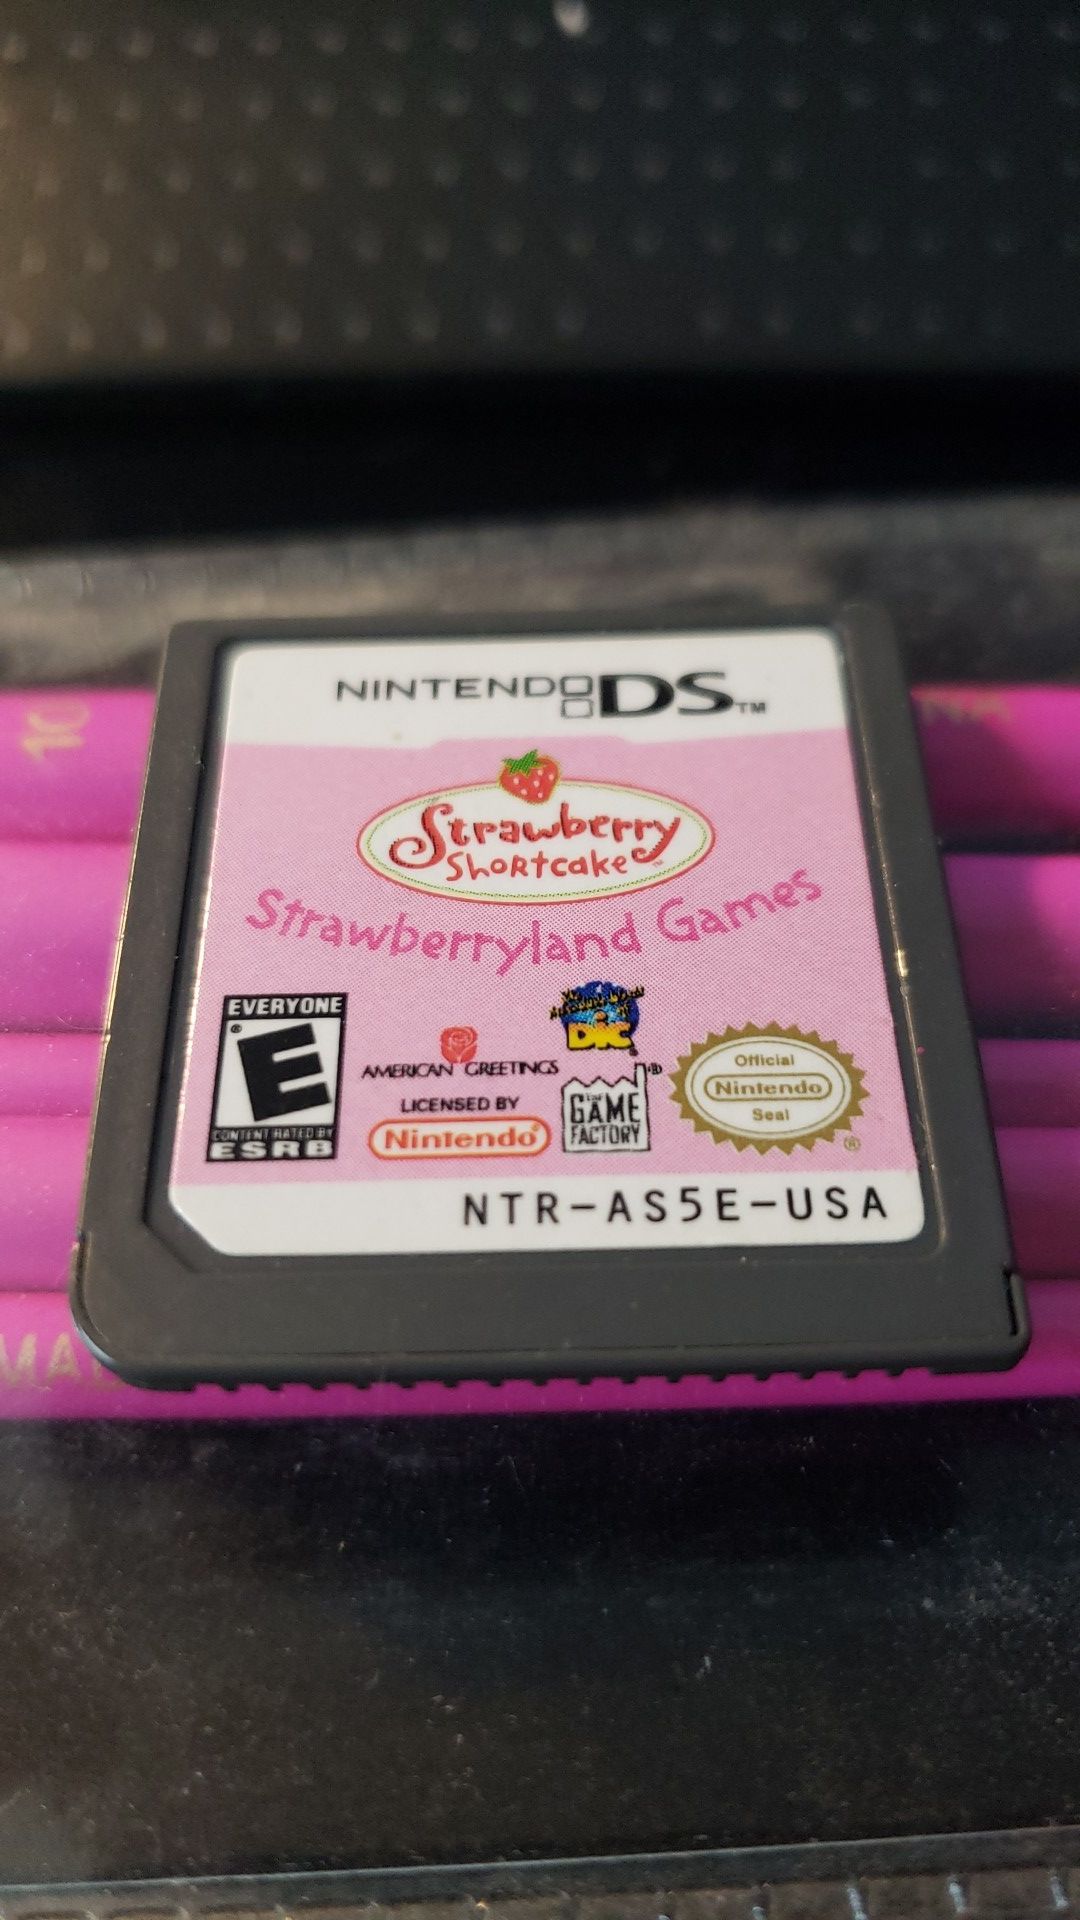 Strawberry Shortcake for your Nintendo DS